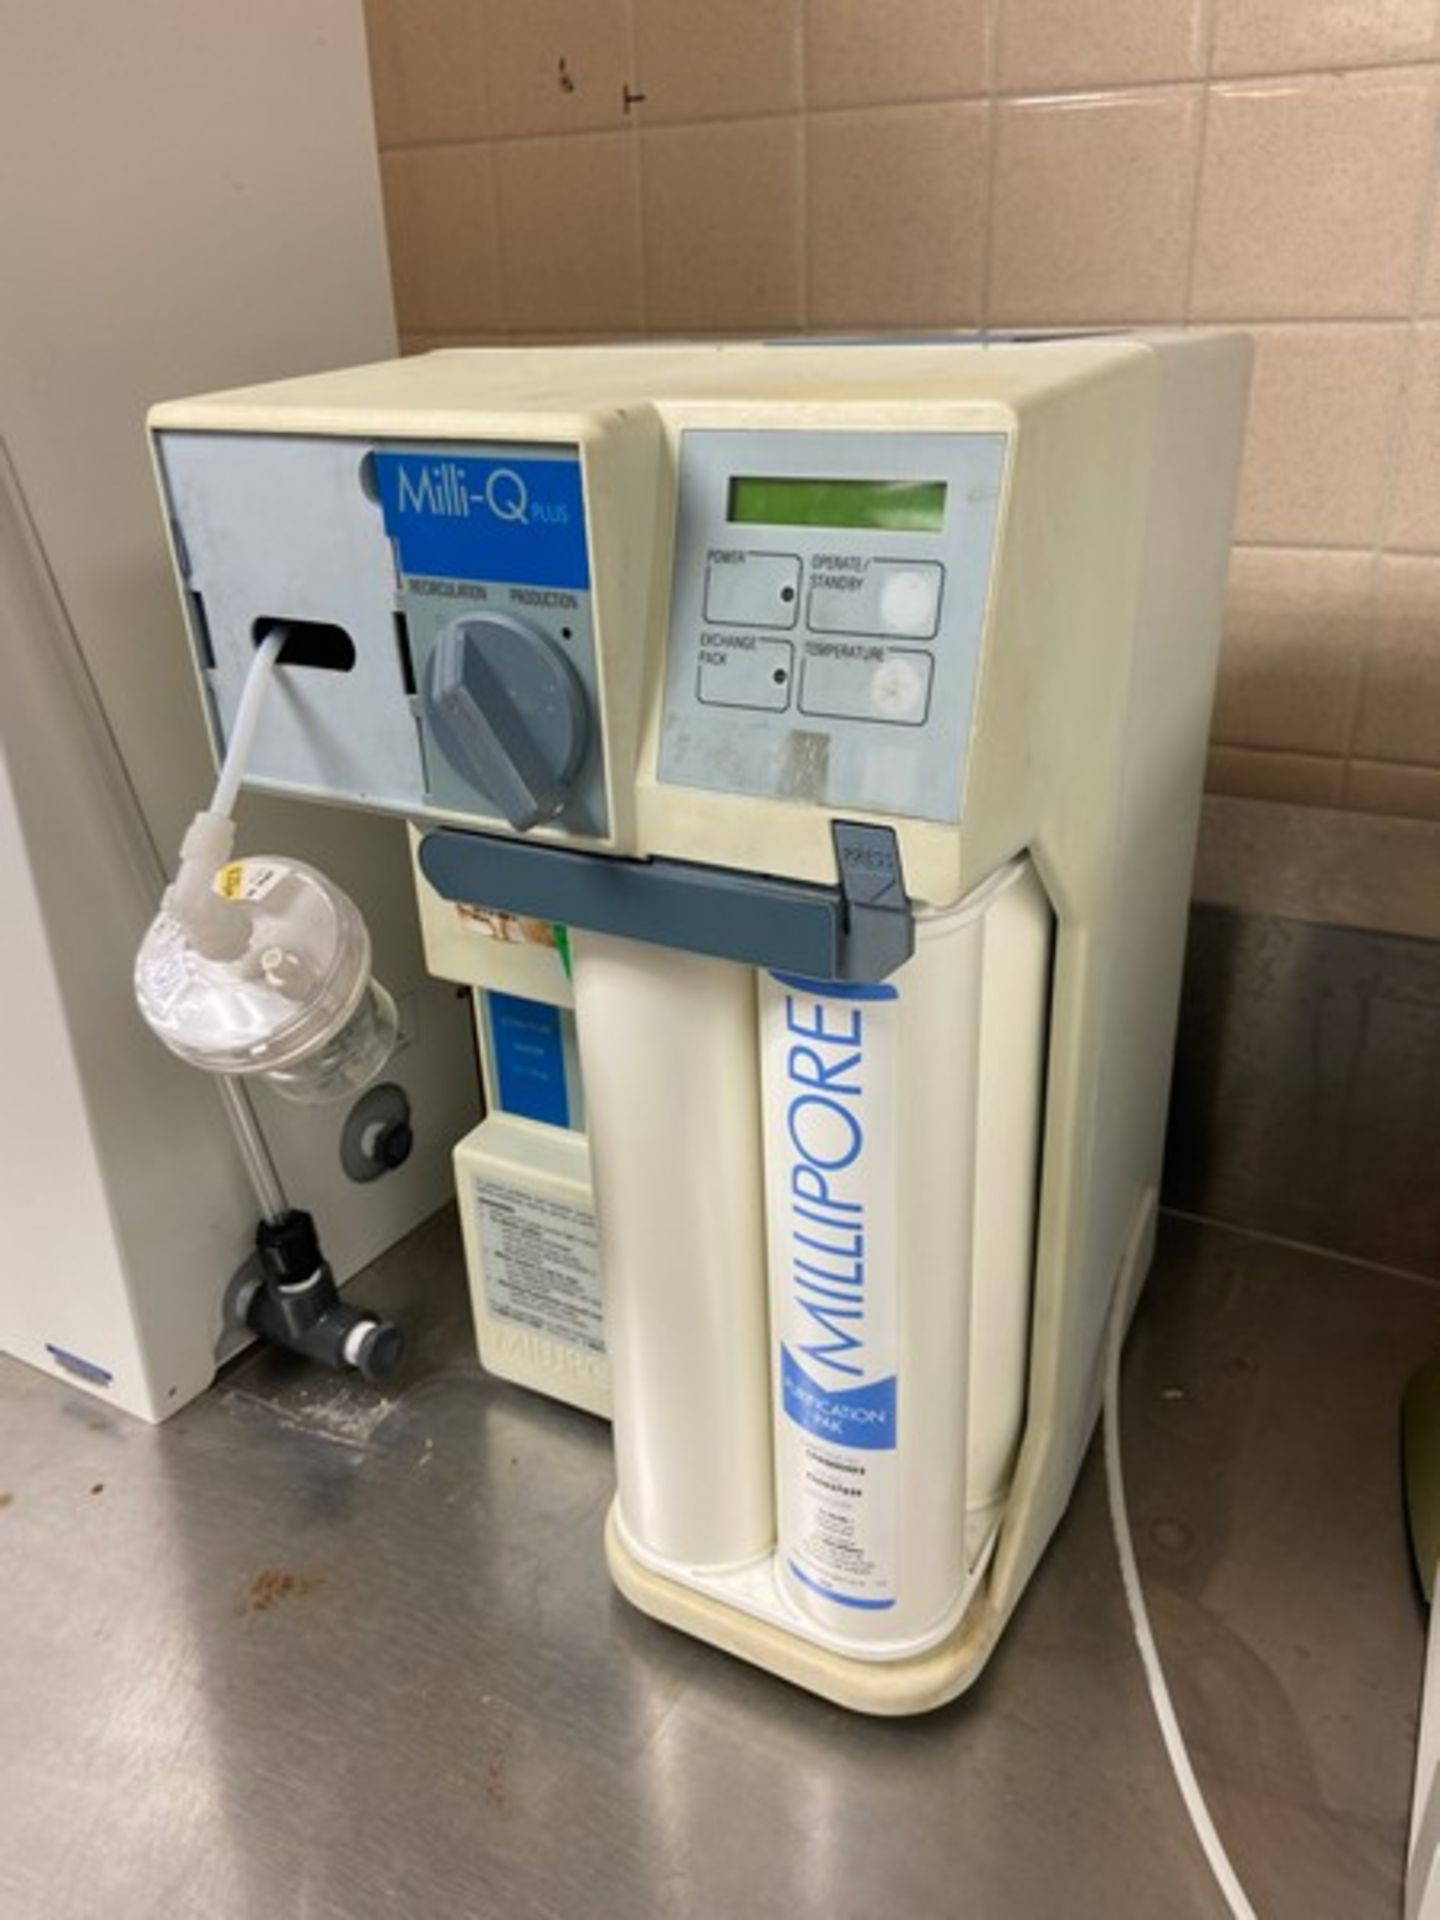 Millipore Milli-Q Water Purification System, Cat. No. ZD5211584, S/N F2BM72314T (LOCATED IN-FOR